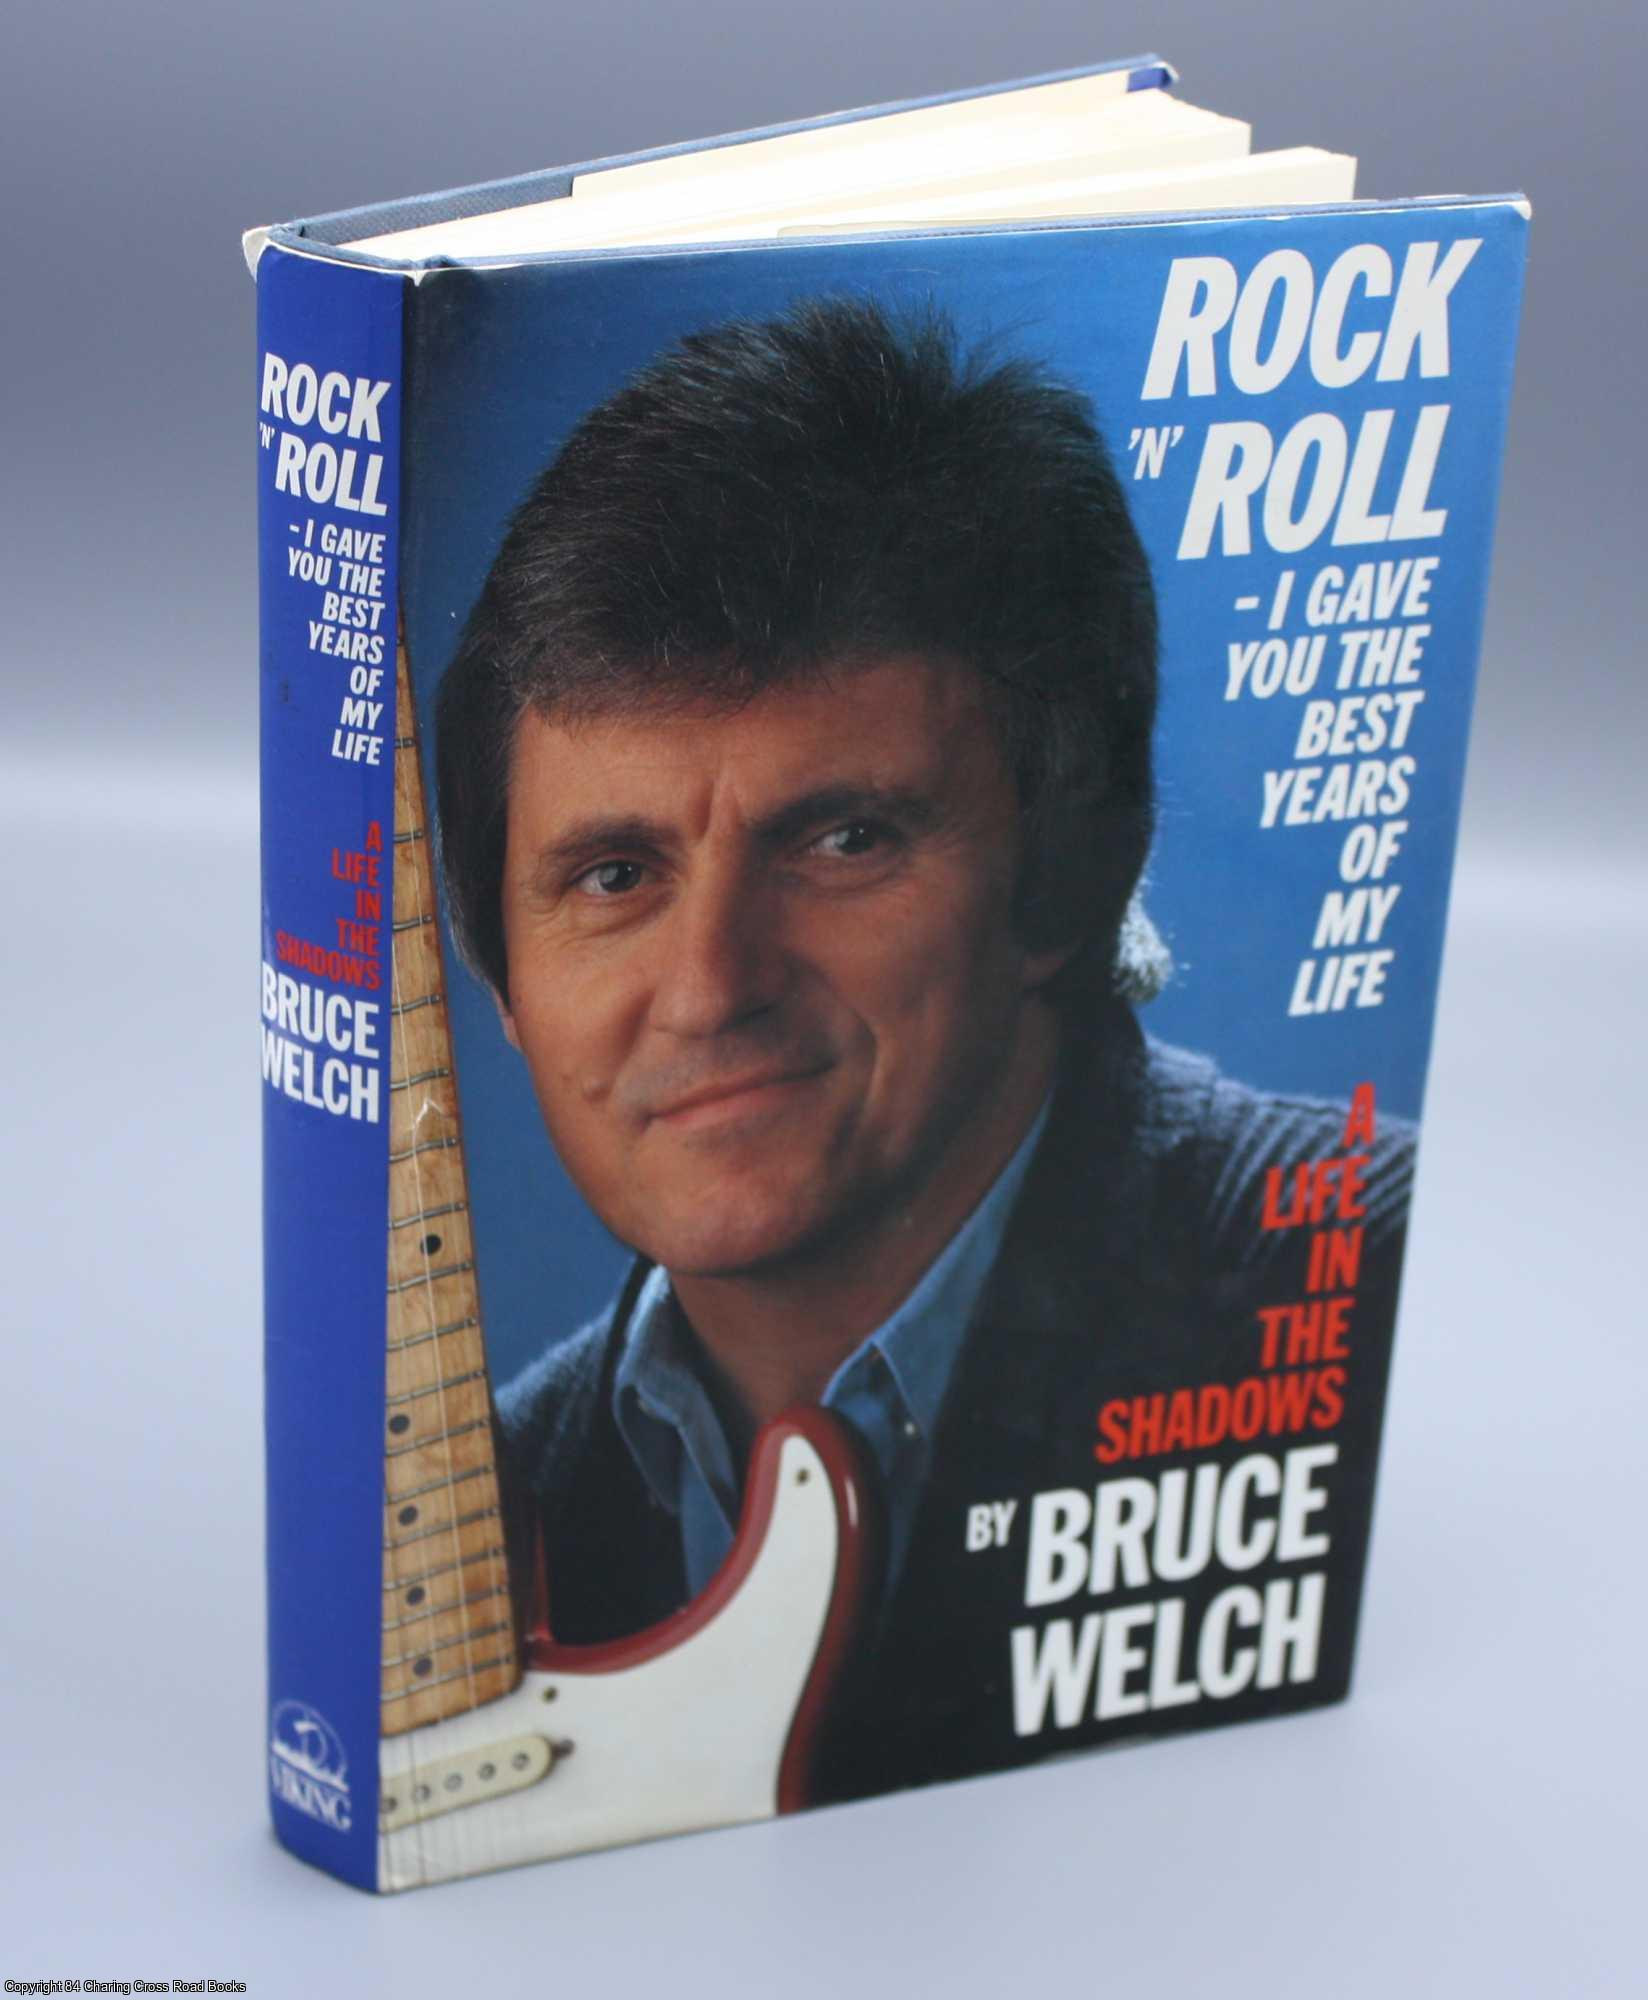 Welch, Bruce - Rock and Roll I Gave You the Best Years of My Life - A Life in the Shadows